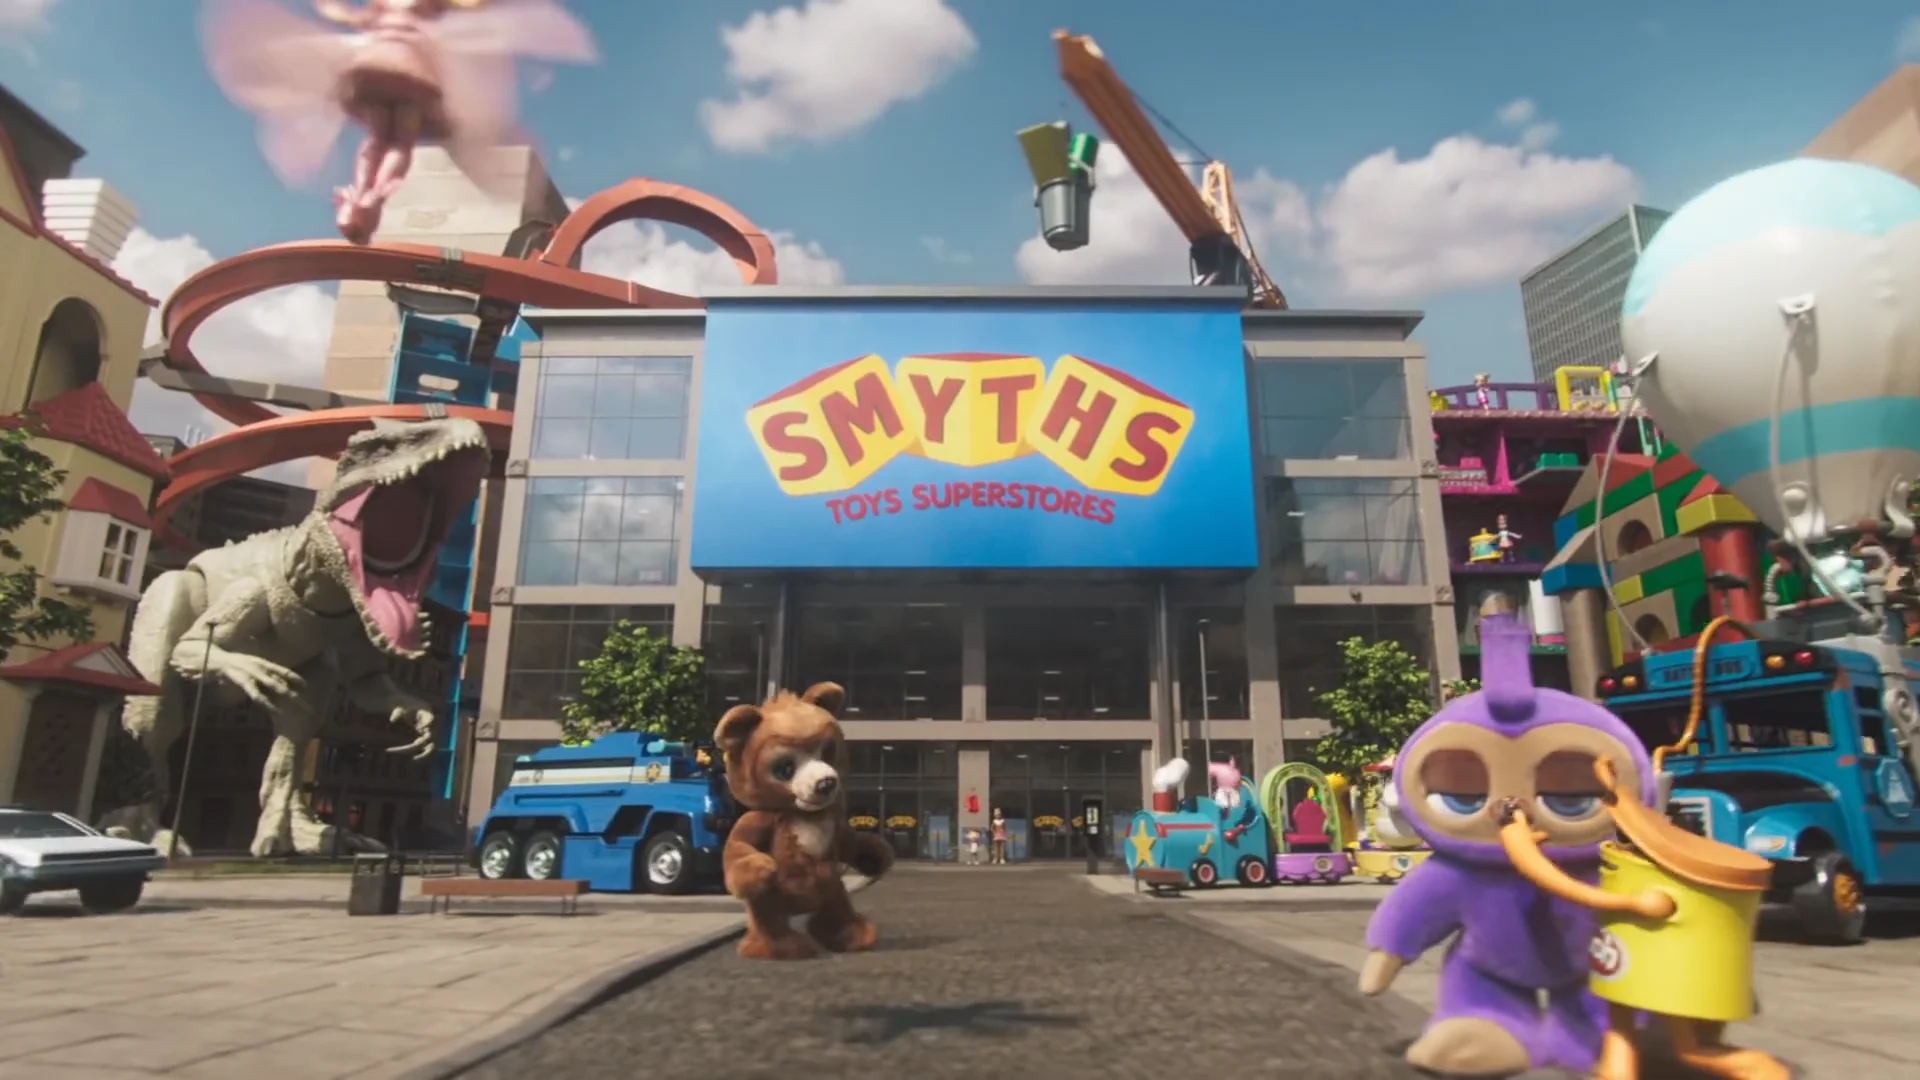 Smyths Toys Superstores - If I Were A Toy (2020) on Vimeo